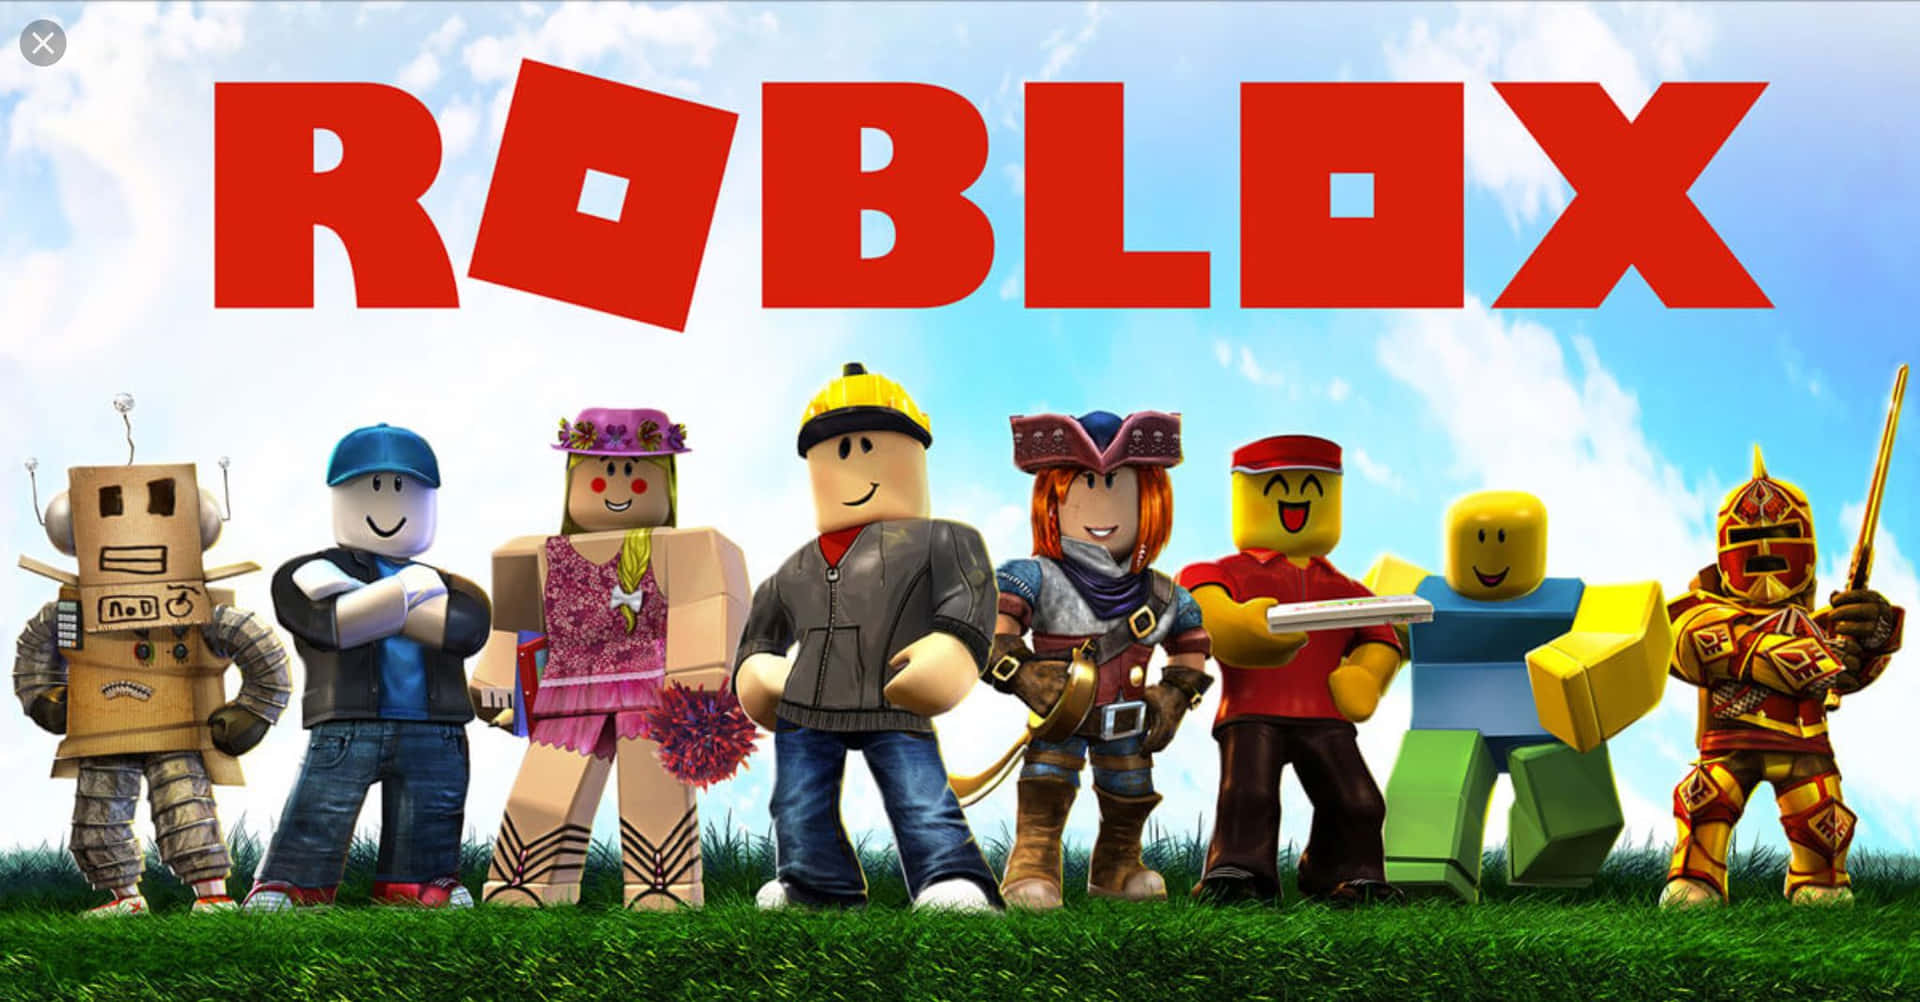 “Adventure Awaits: Join your friends on Roblox for exciting outings and fun stories.” Wallpaper